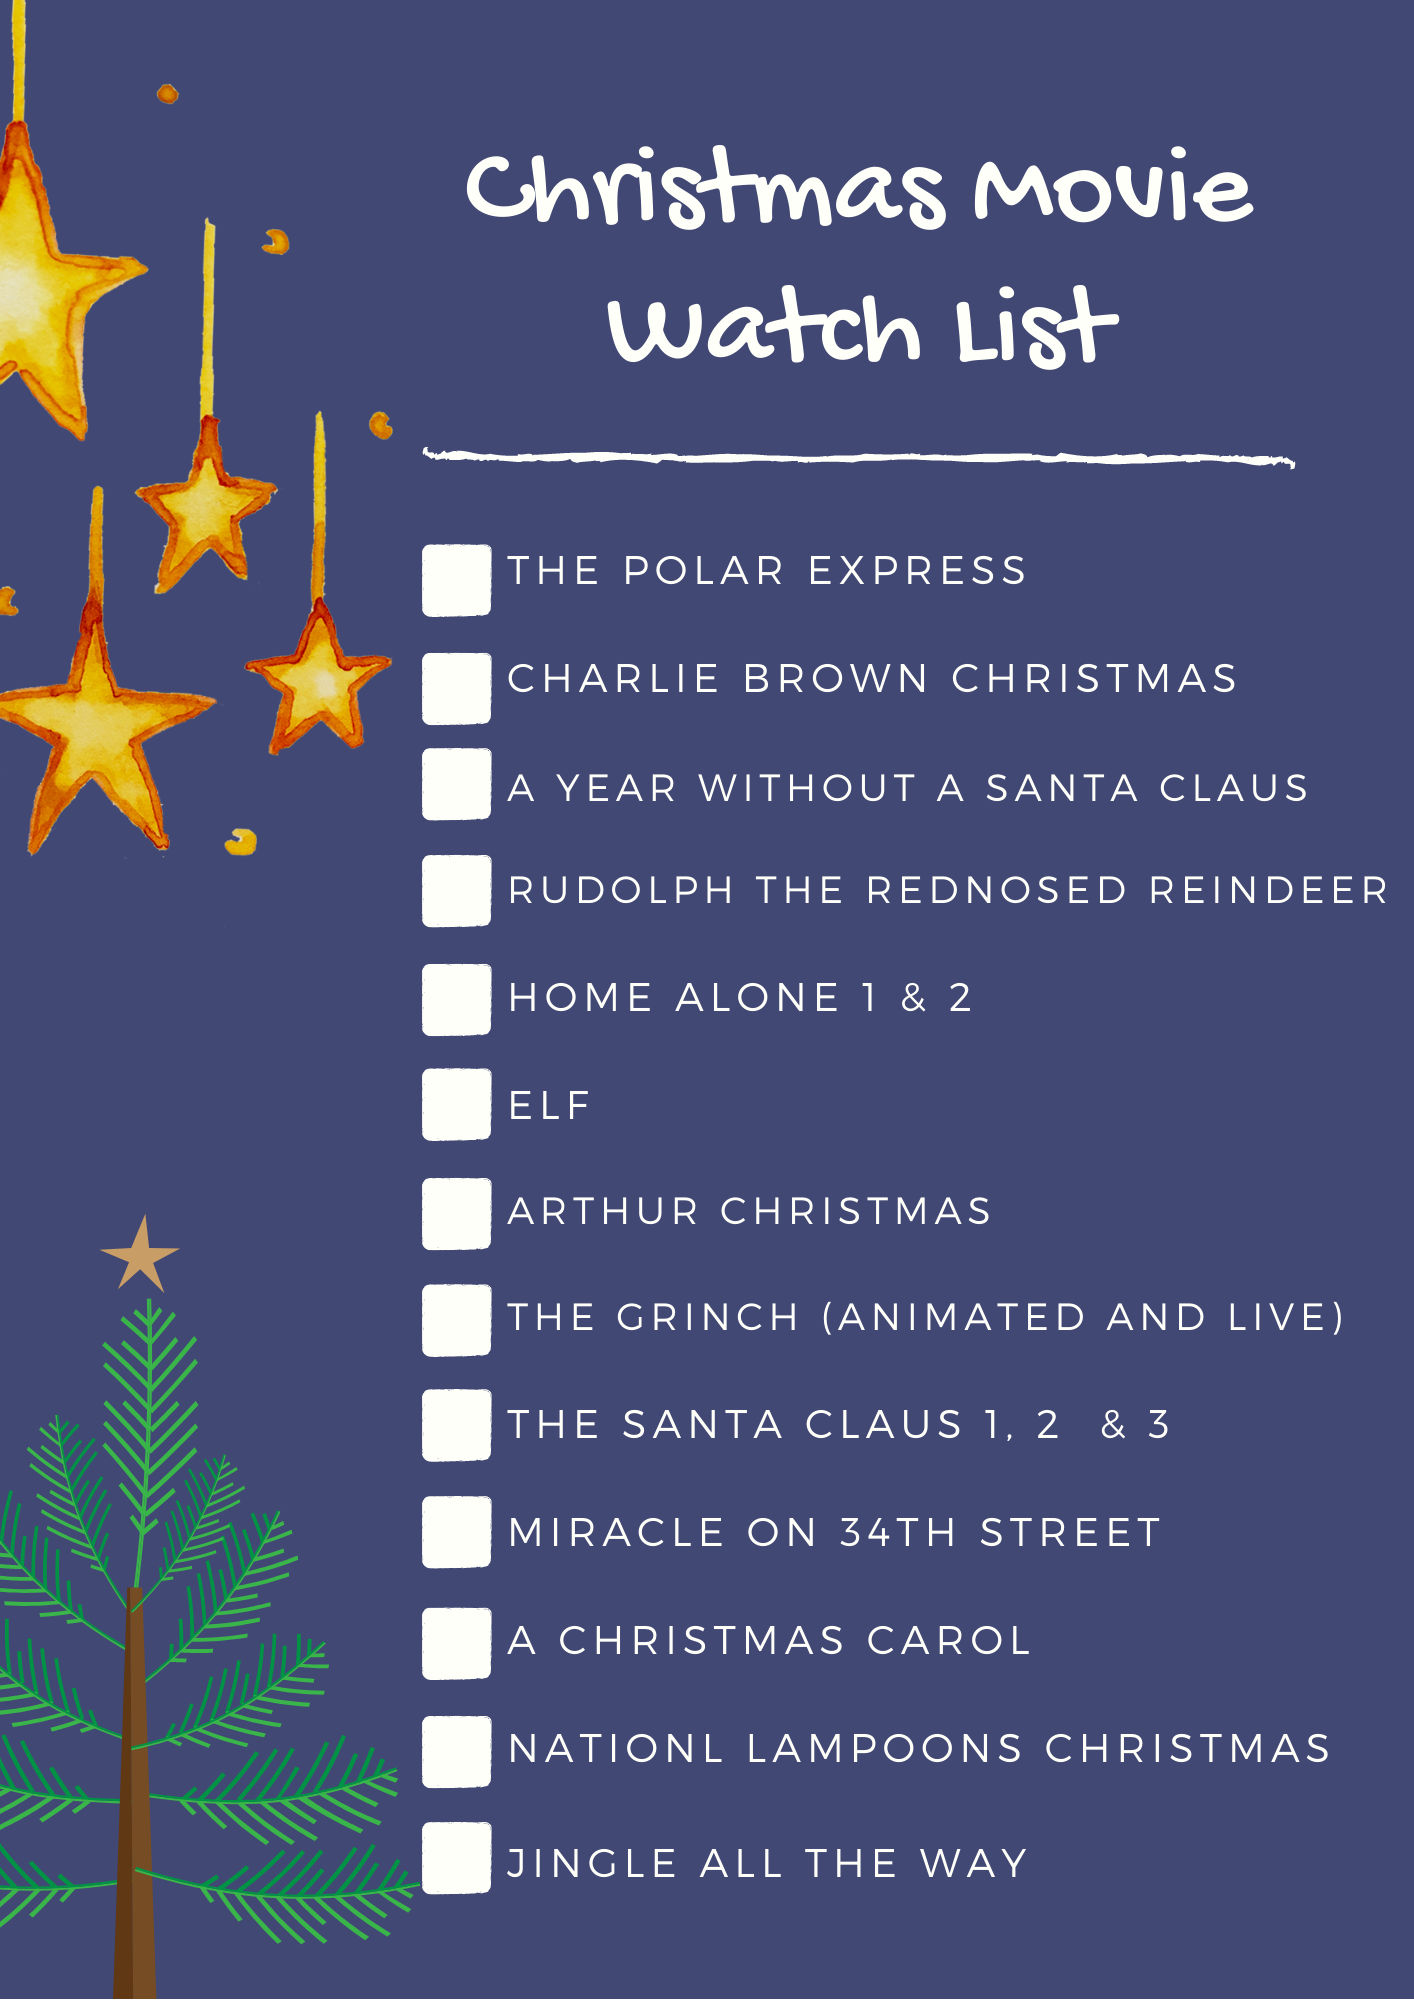 Christmas movie watch list for the holidays